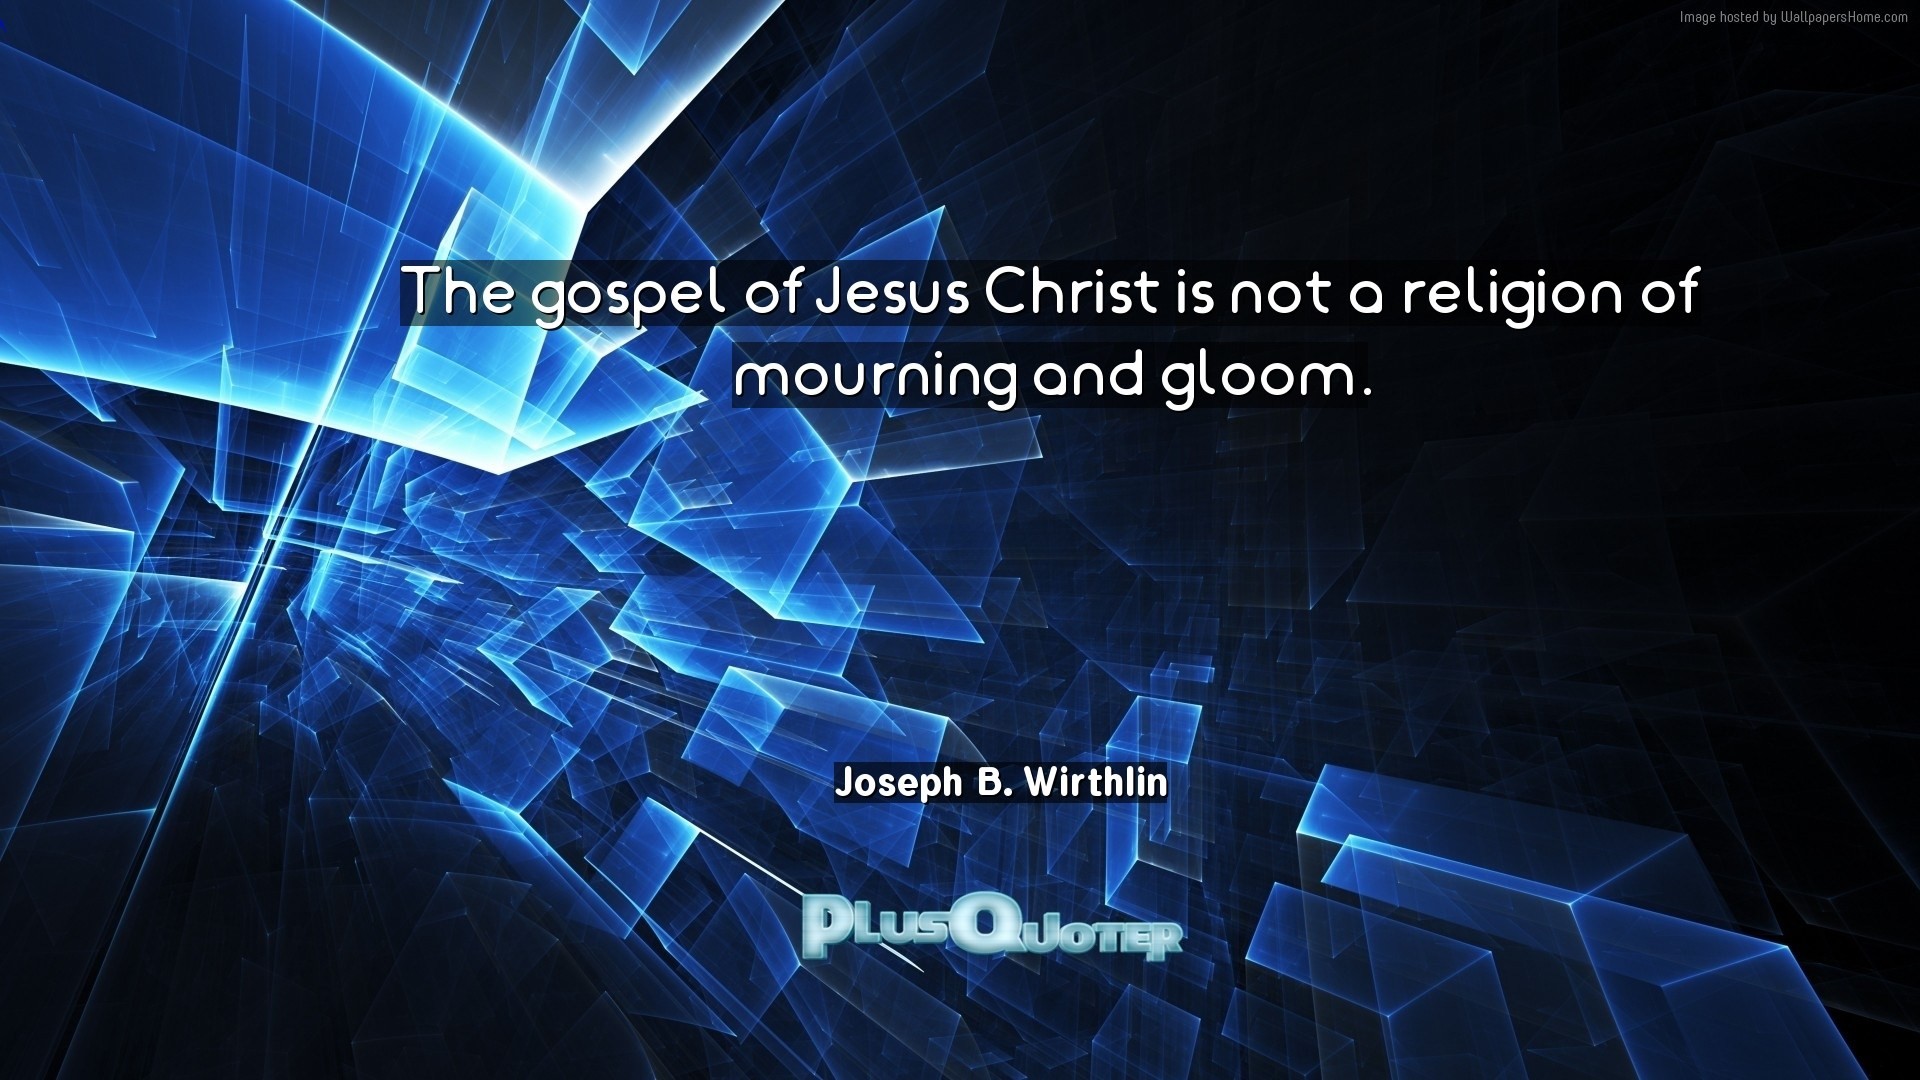 1920x1080 Download Wallpaper with inspirational Quotes- "The gospel of Jesus Christ  is not a religion